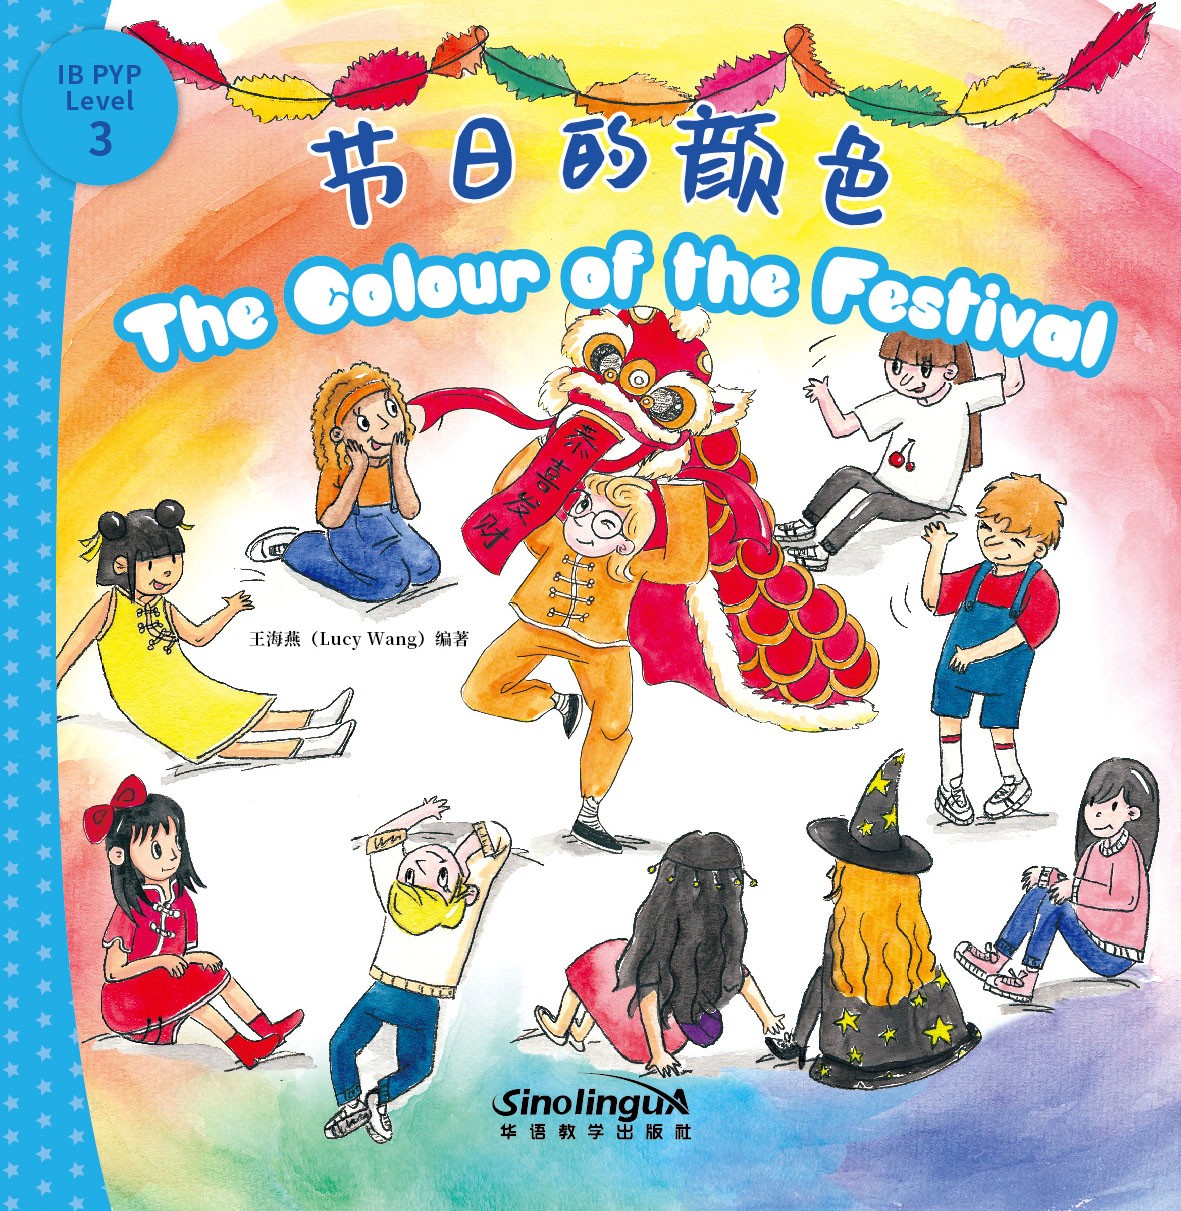 (I Can Read by Myself: IB PYP Inquiry Graded Reader Level 3)The Colour of the Festival